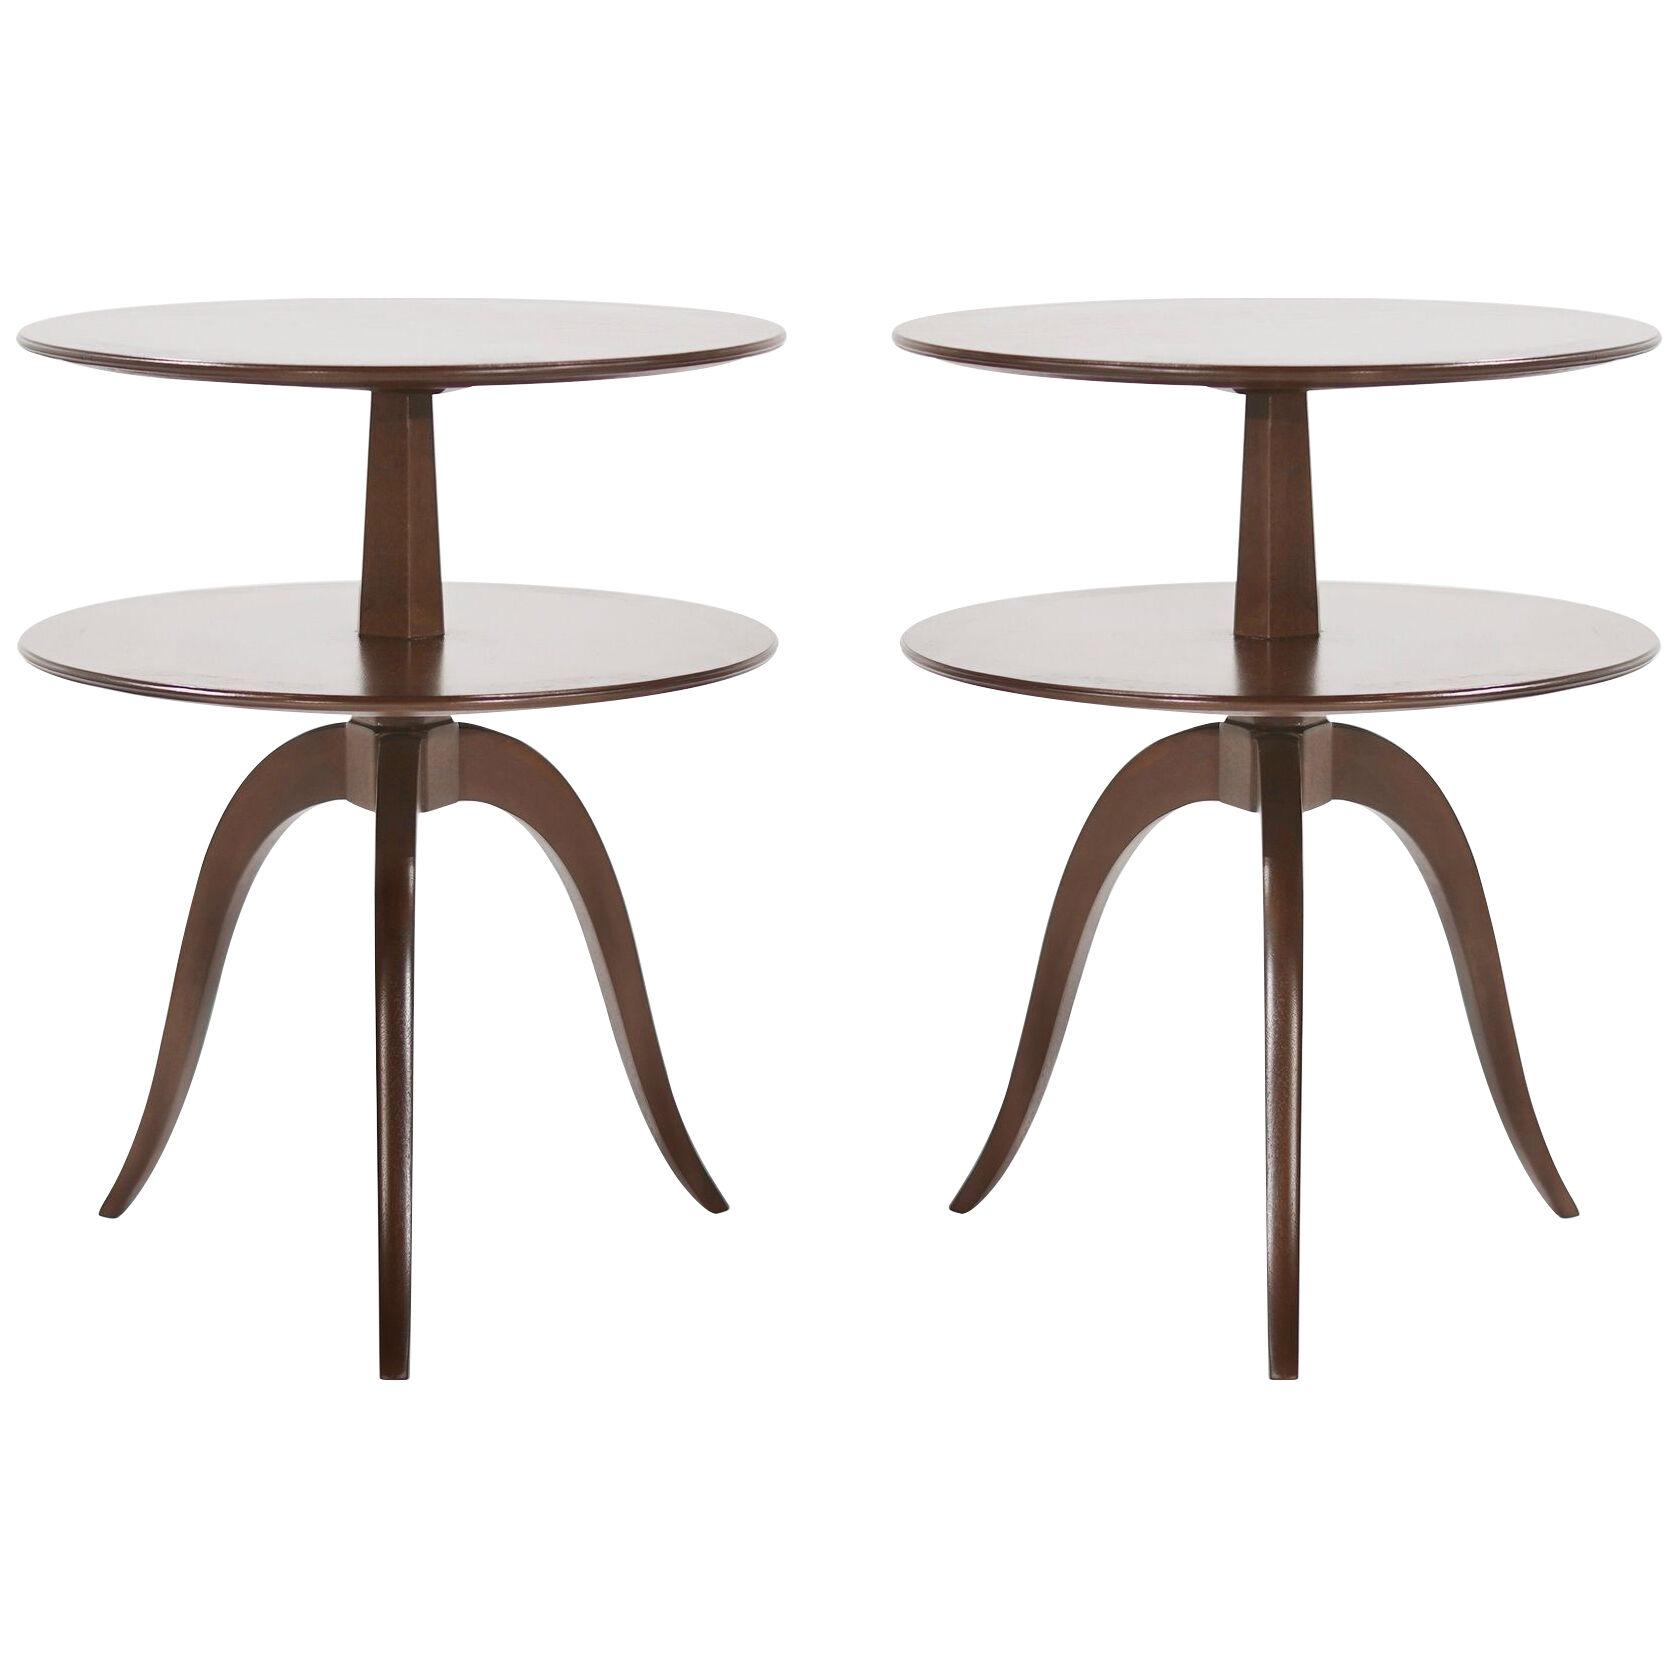 Set of Tiered End Tables by Paul Frankl, C. 1950s